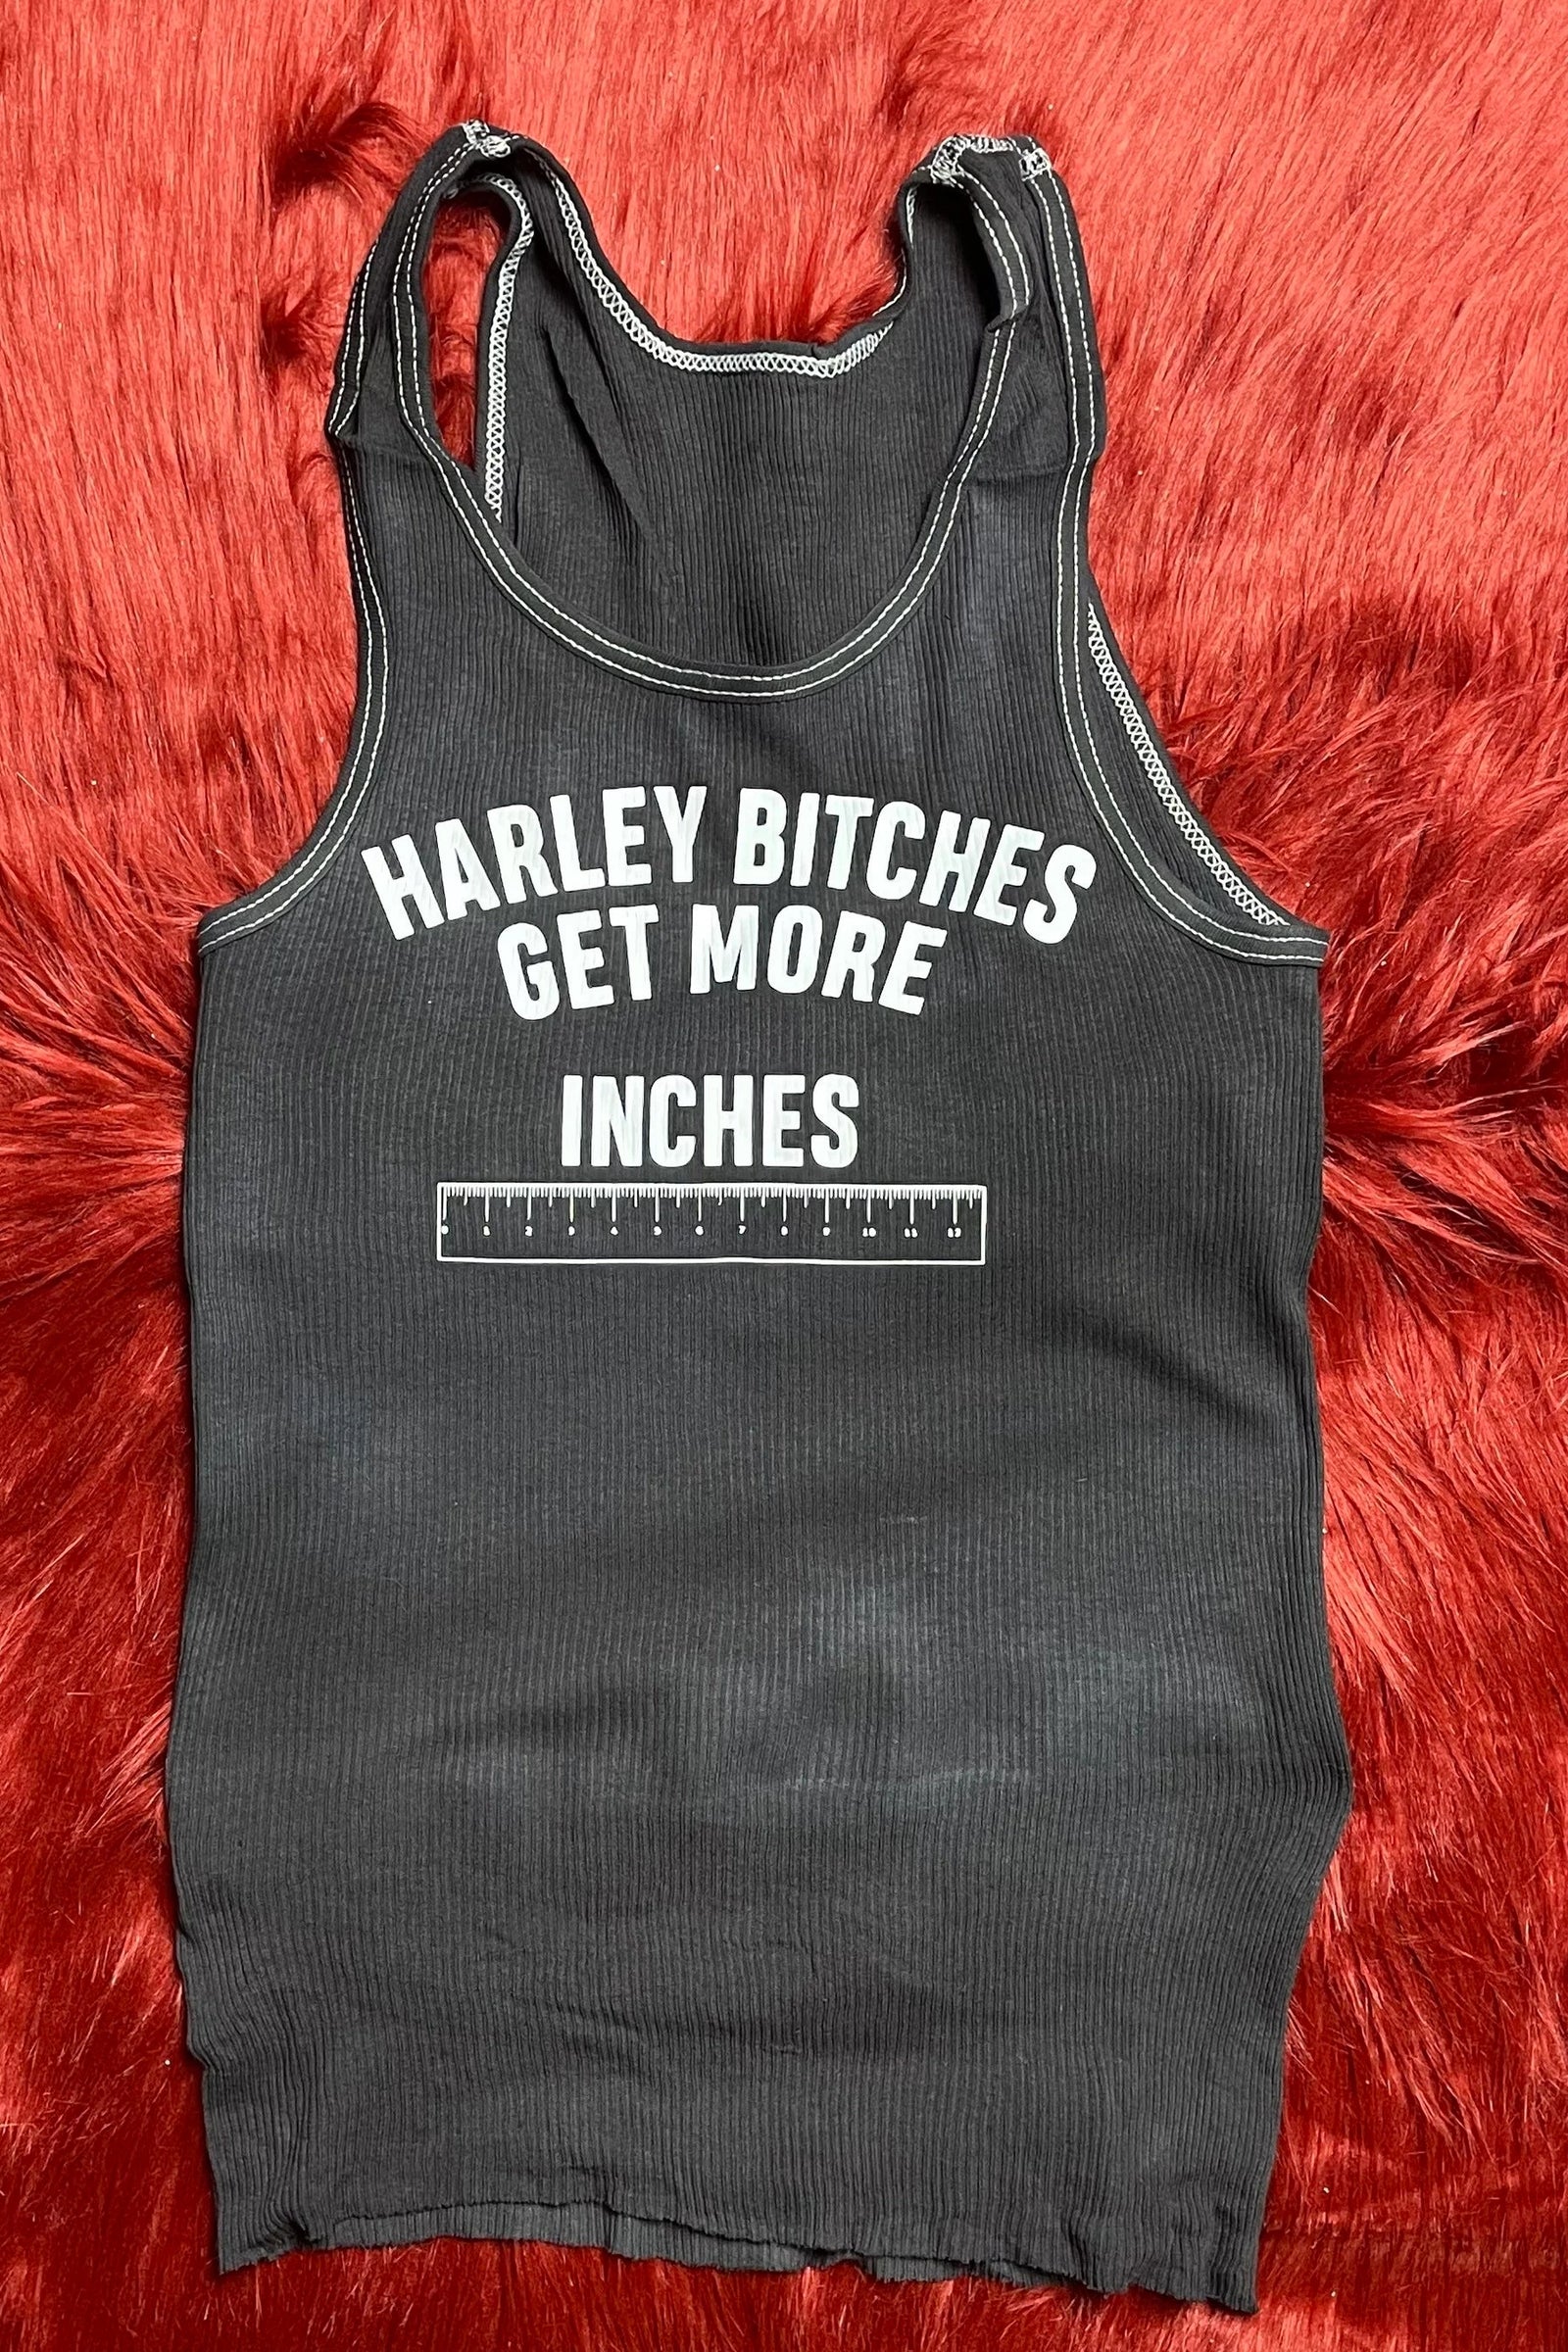 Harley Bitches Get More Inches Tank